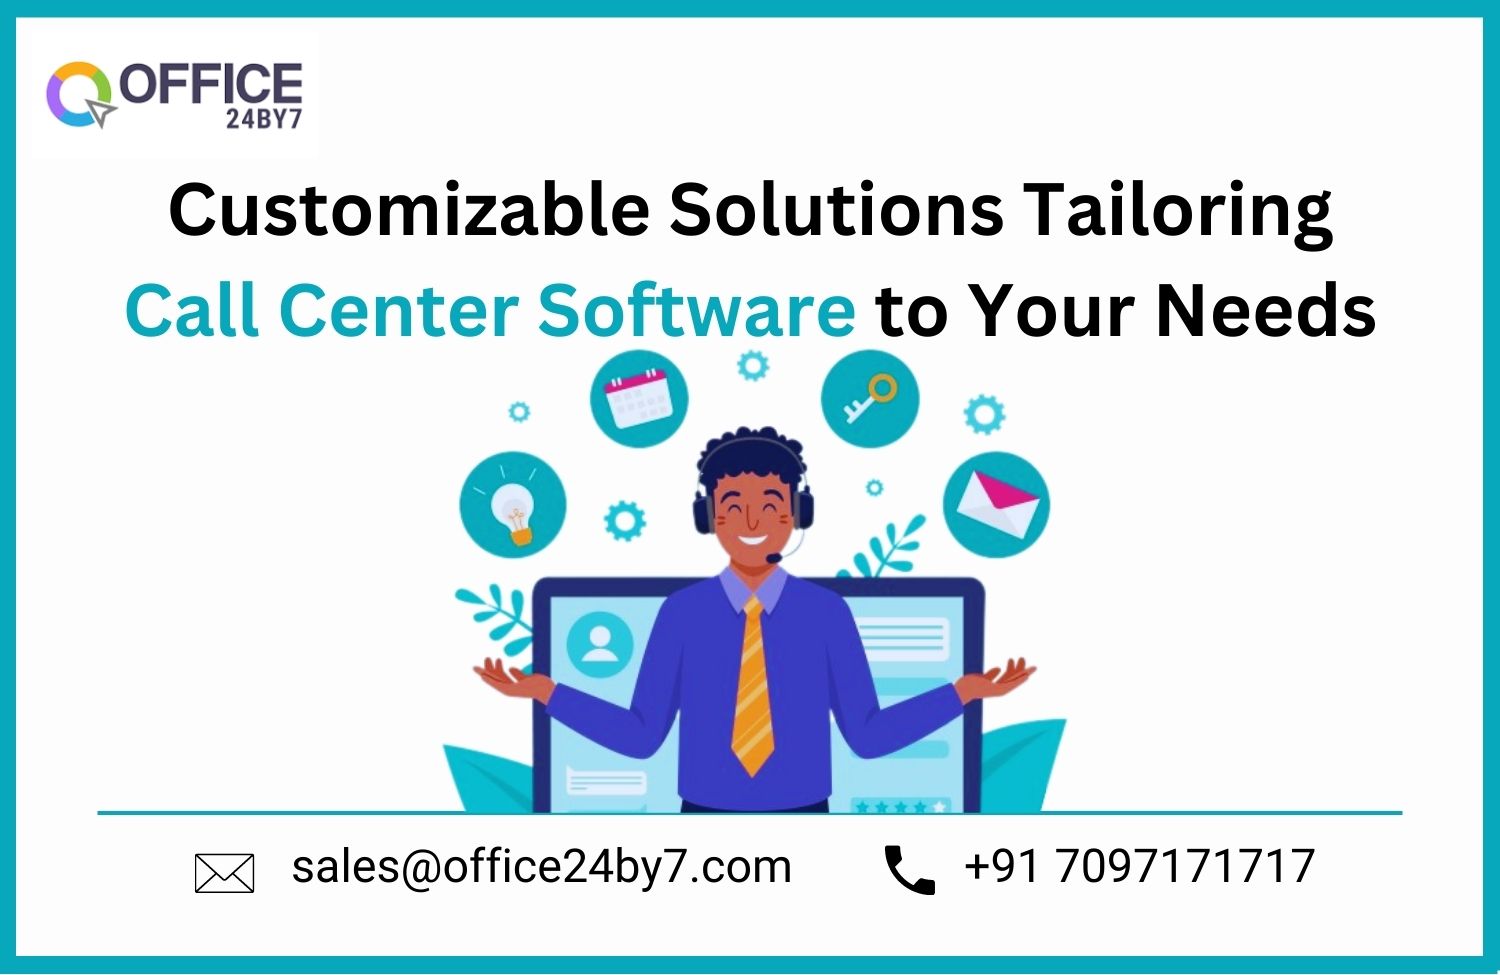 Customizable Solutions Tailoring Call Center Software to Your Needs